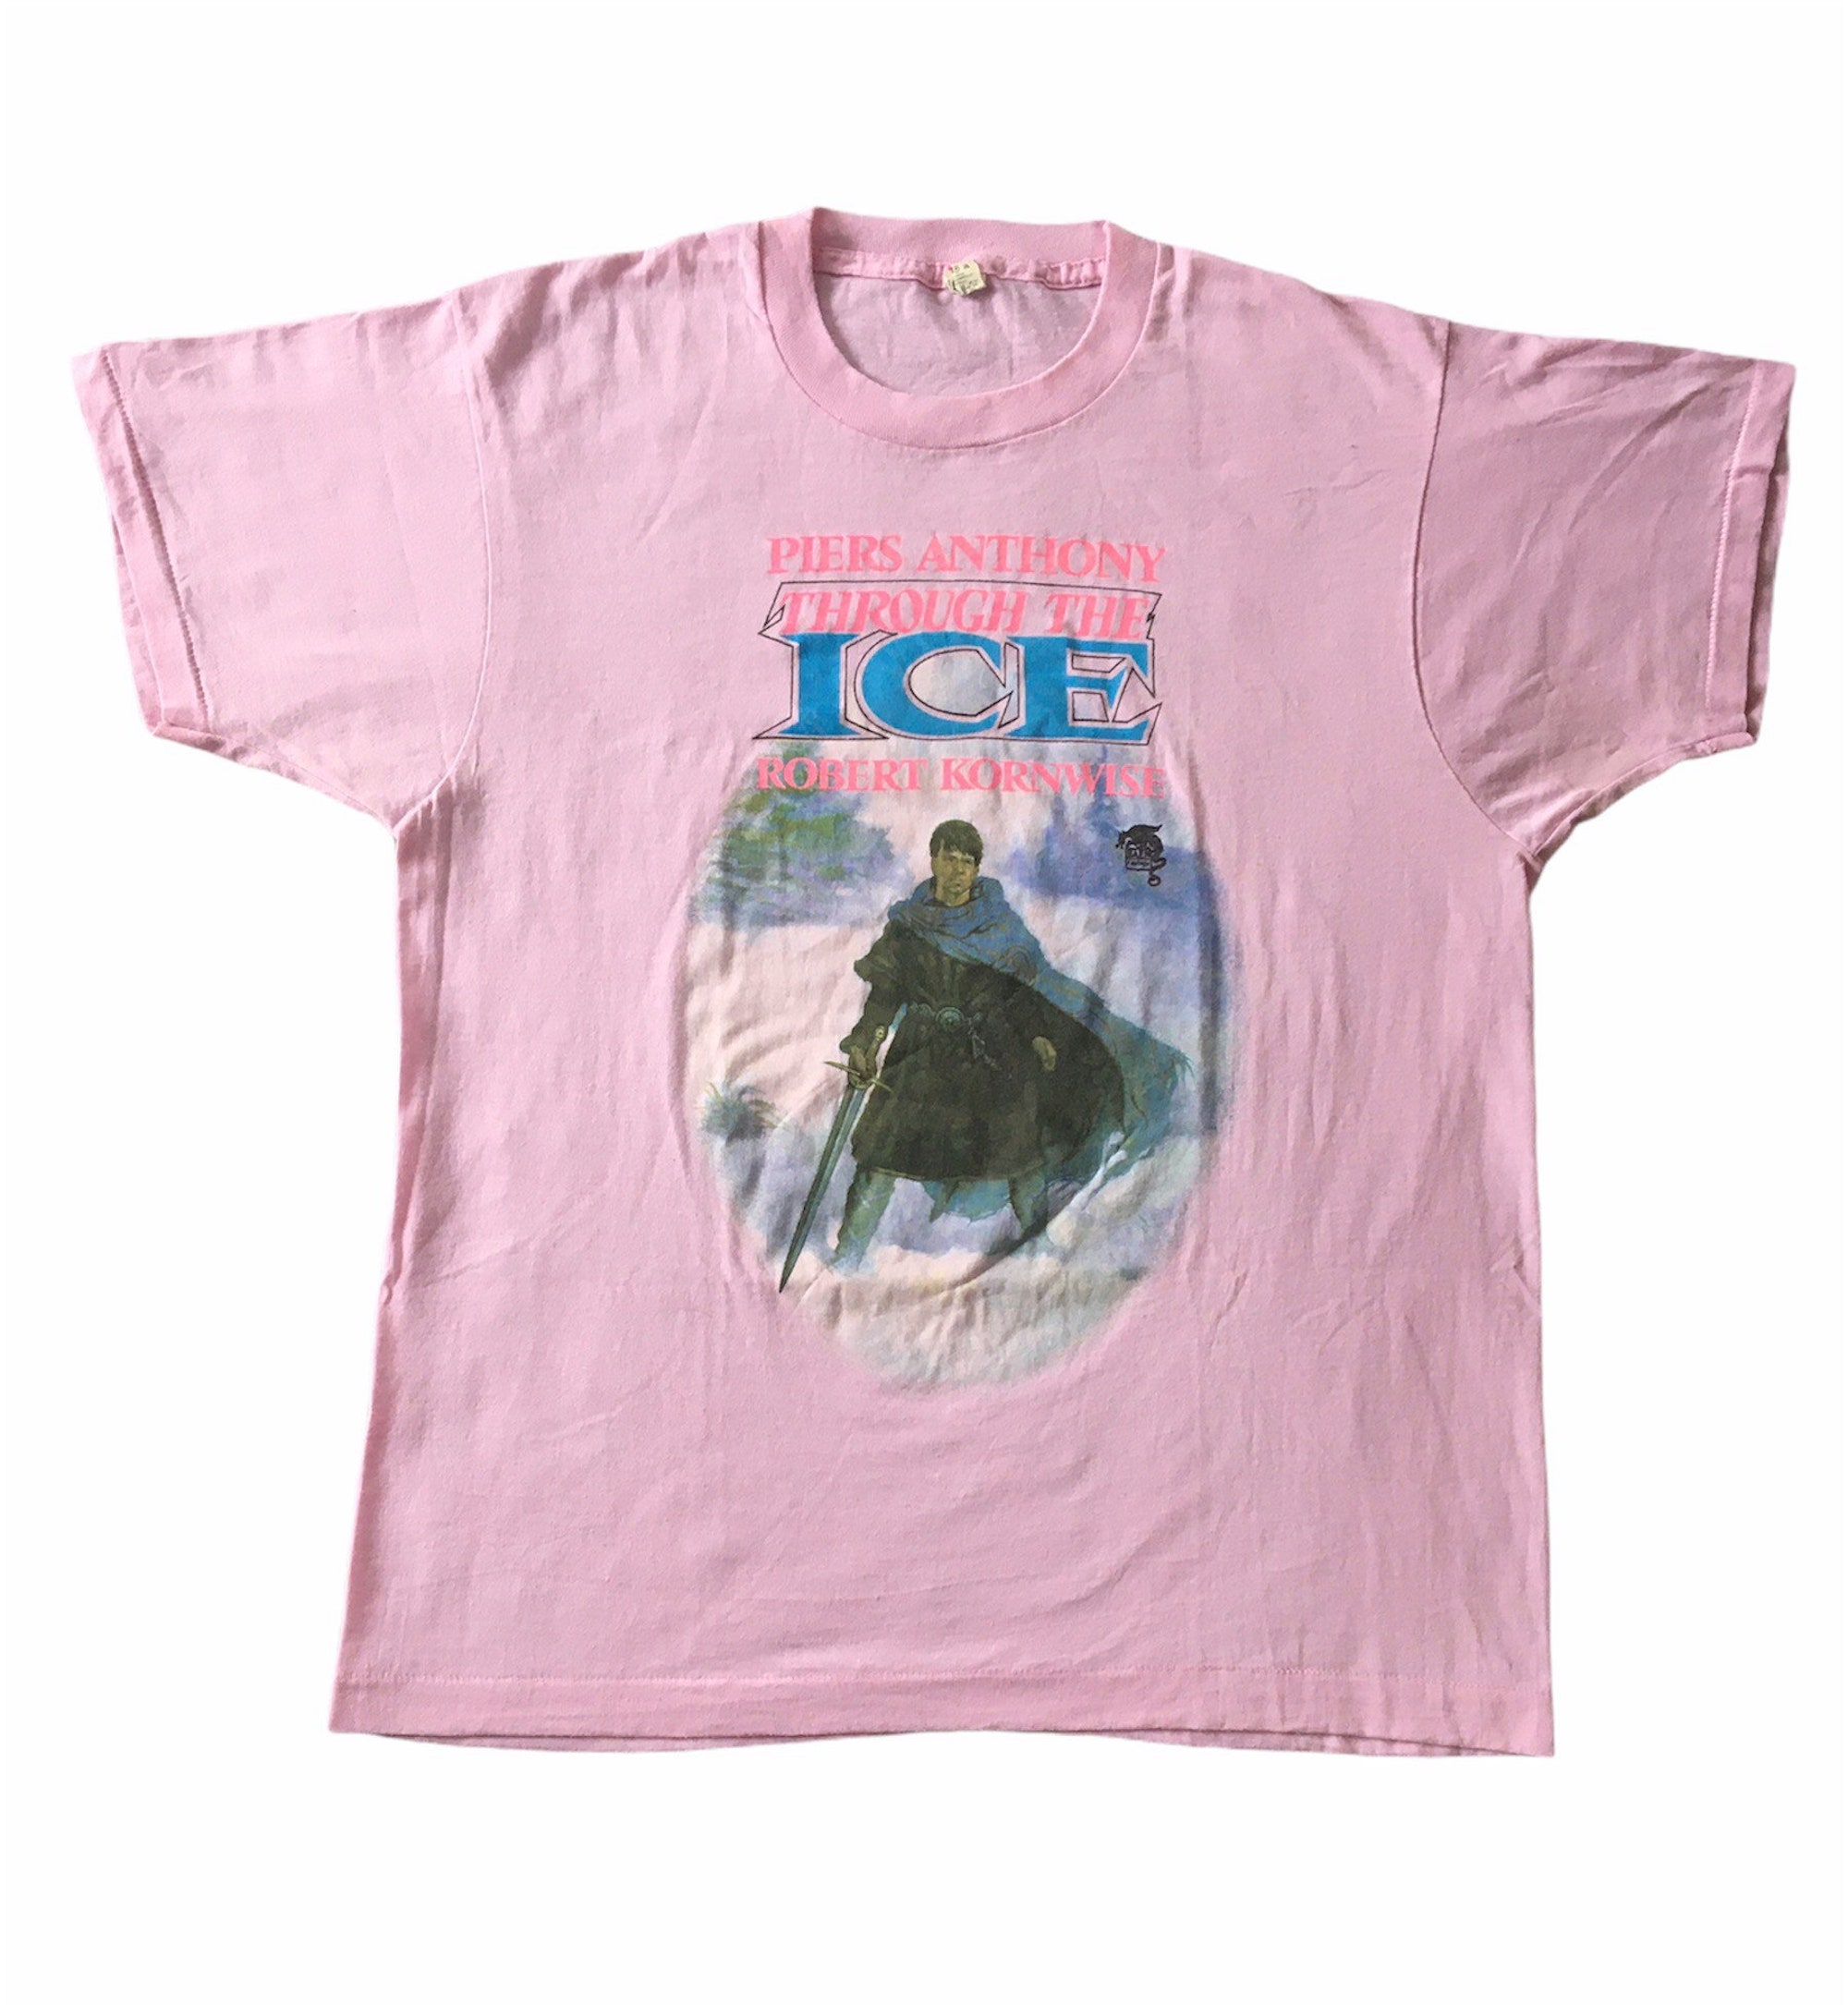 Discover Vintage 80s Through The Ice Piers Anthony Fantasy Novel Screen Stars T-Shirt